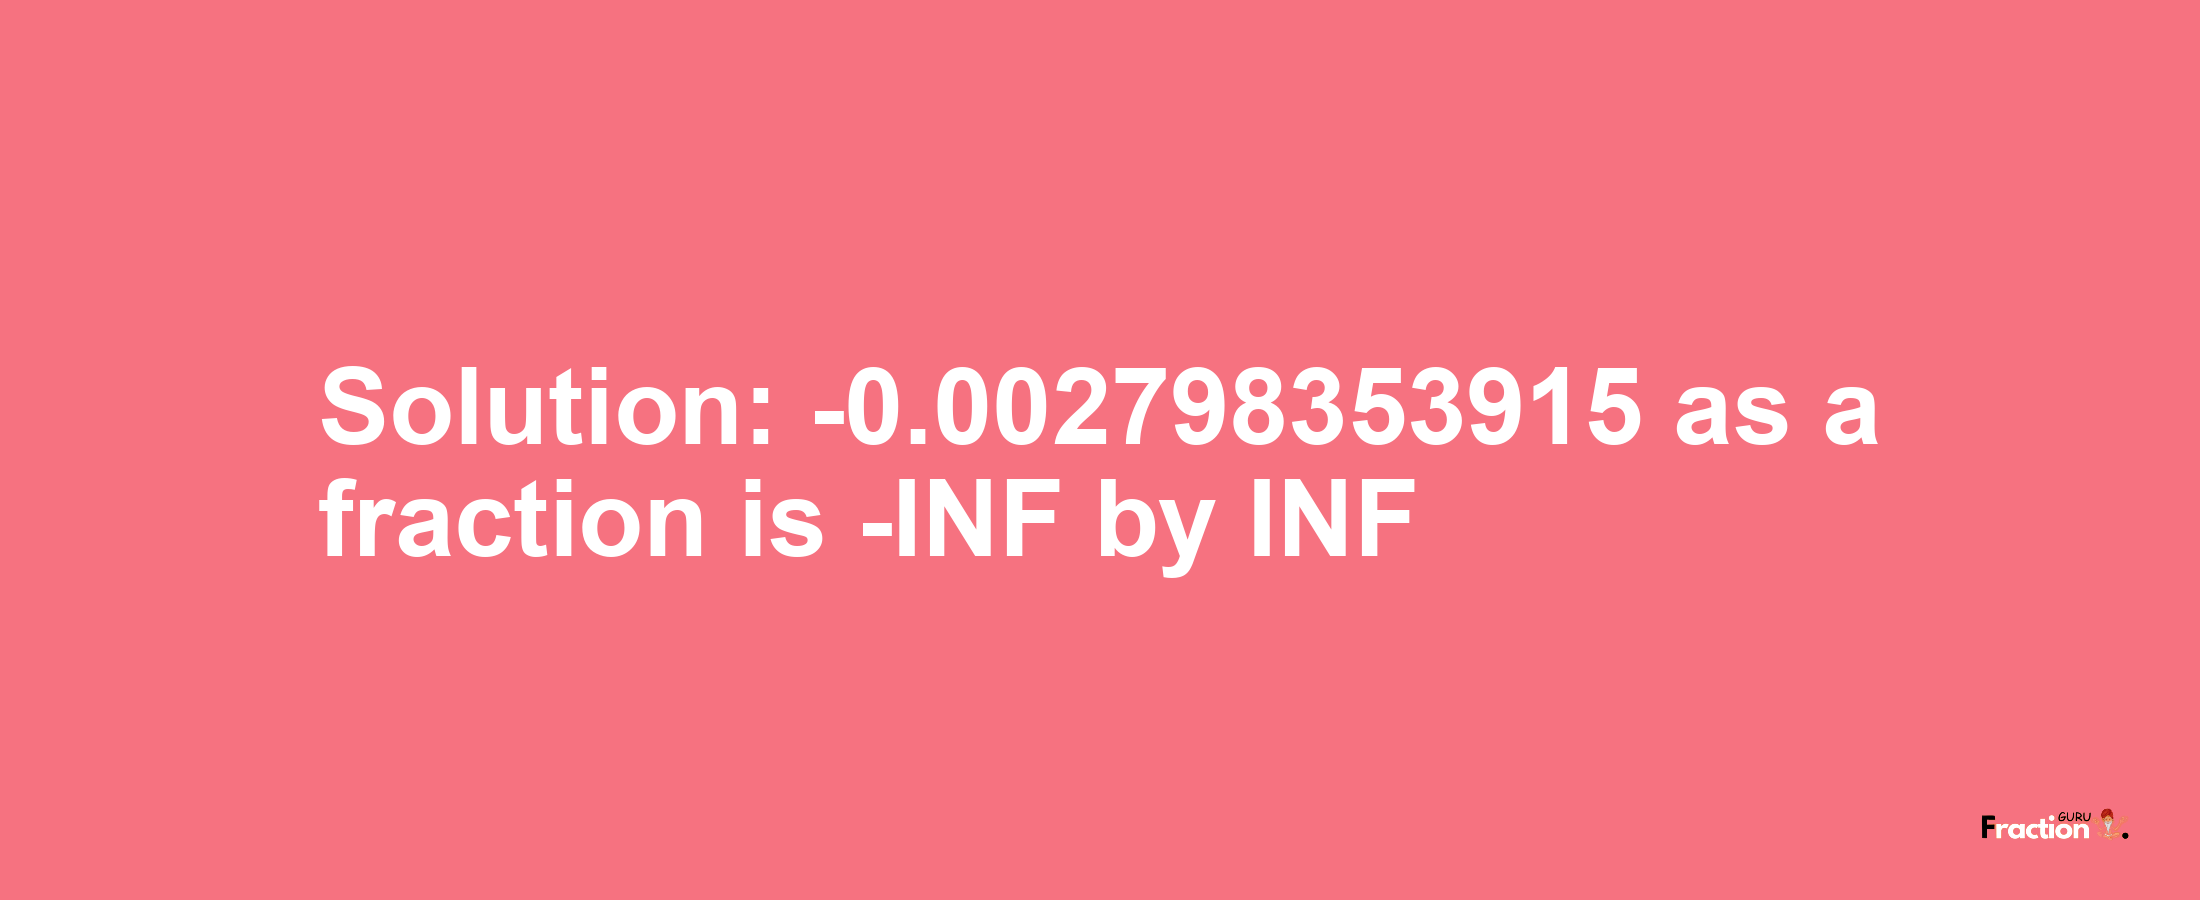 Solution:-0.002798353915 as a fraction is -INF/INF